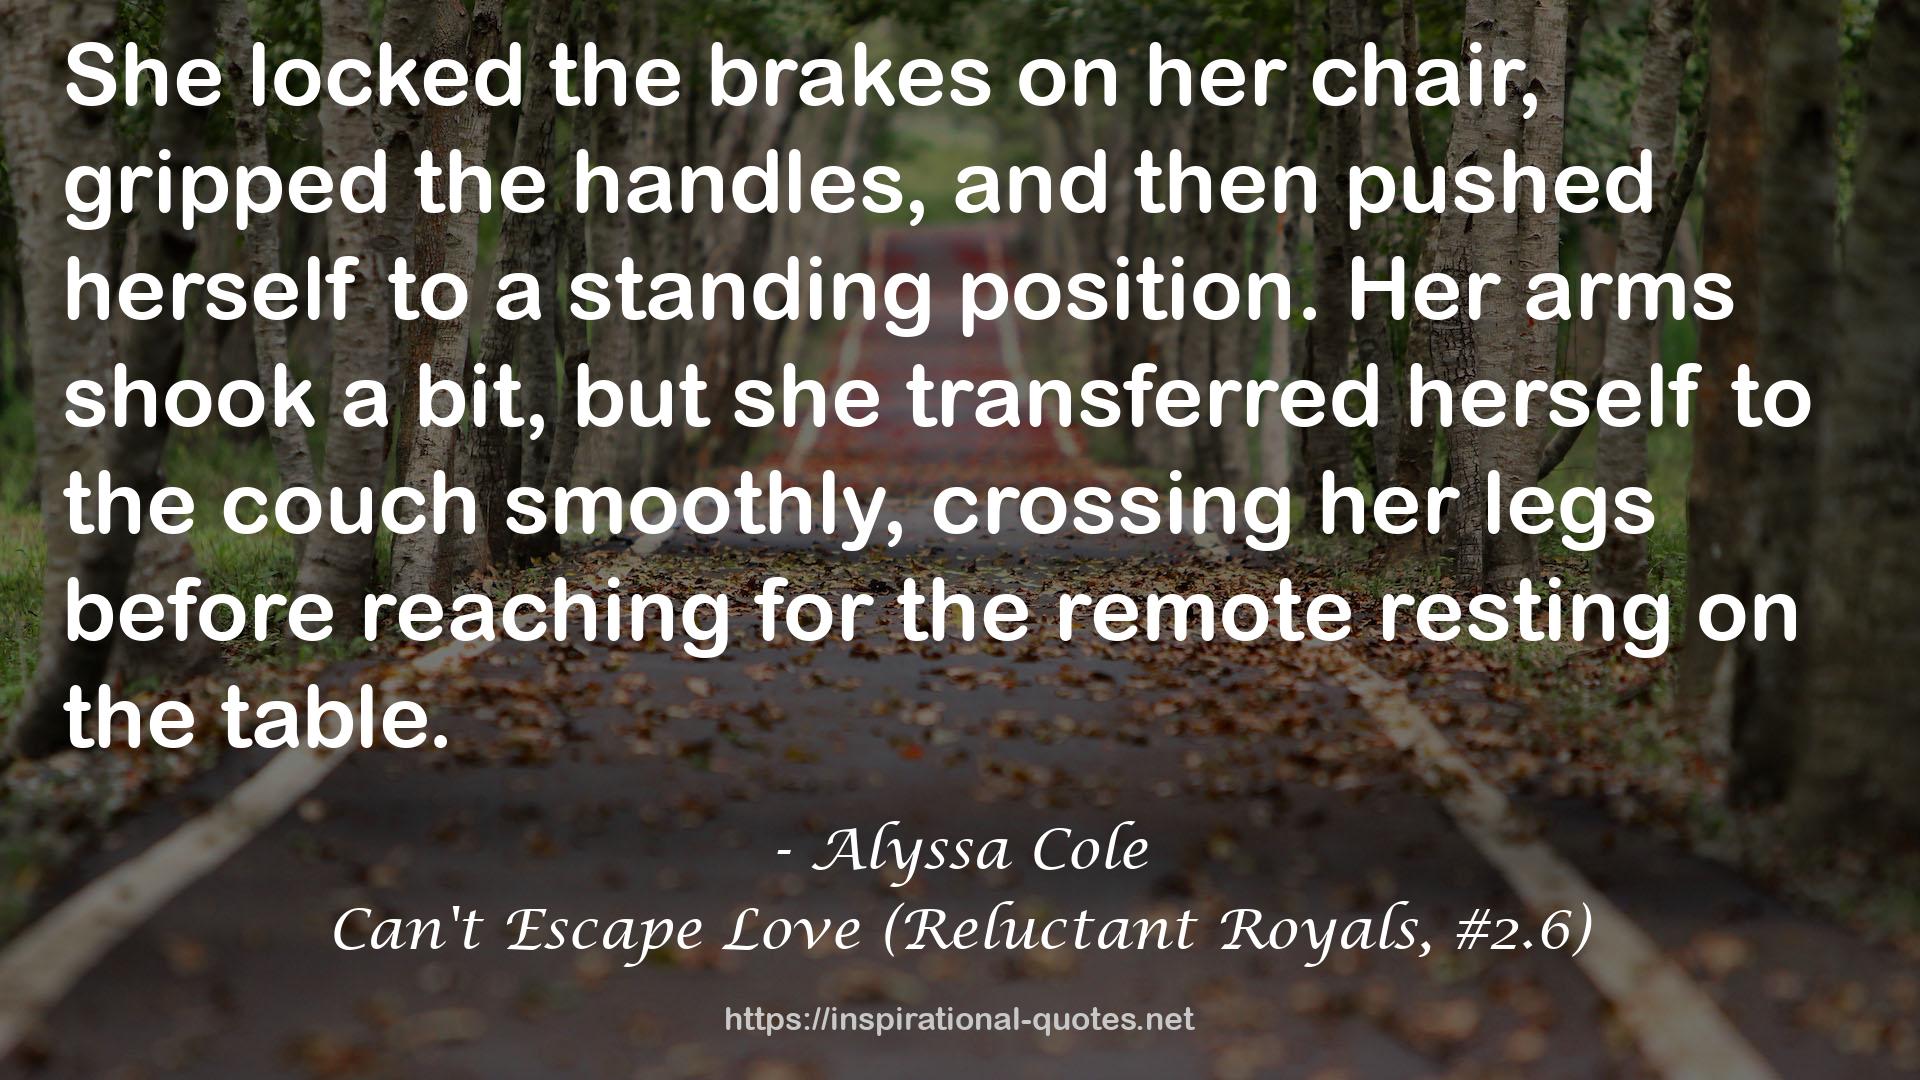 Can't Escape Love (Reluctant Royals, #2.6) QUOTES